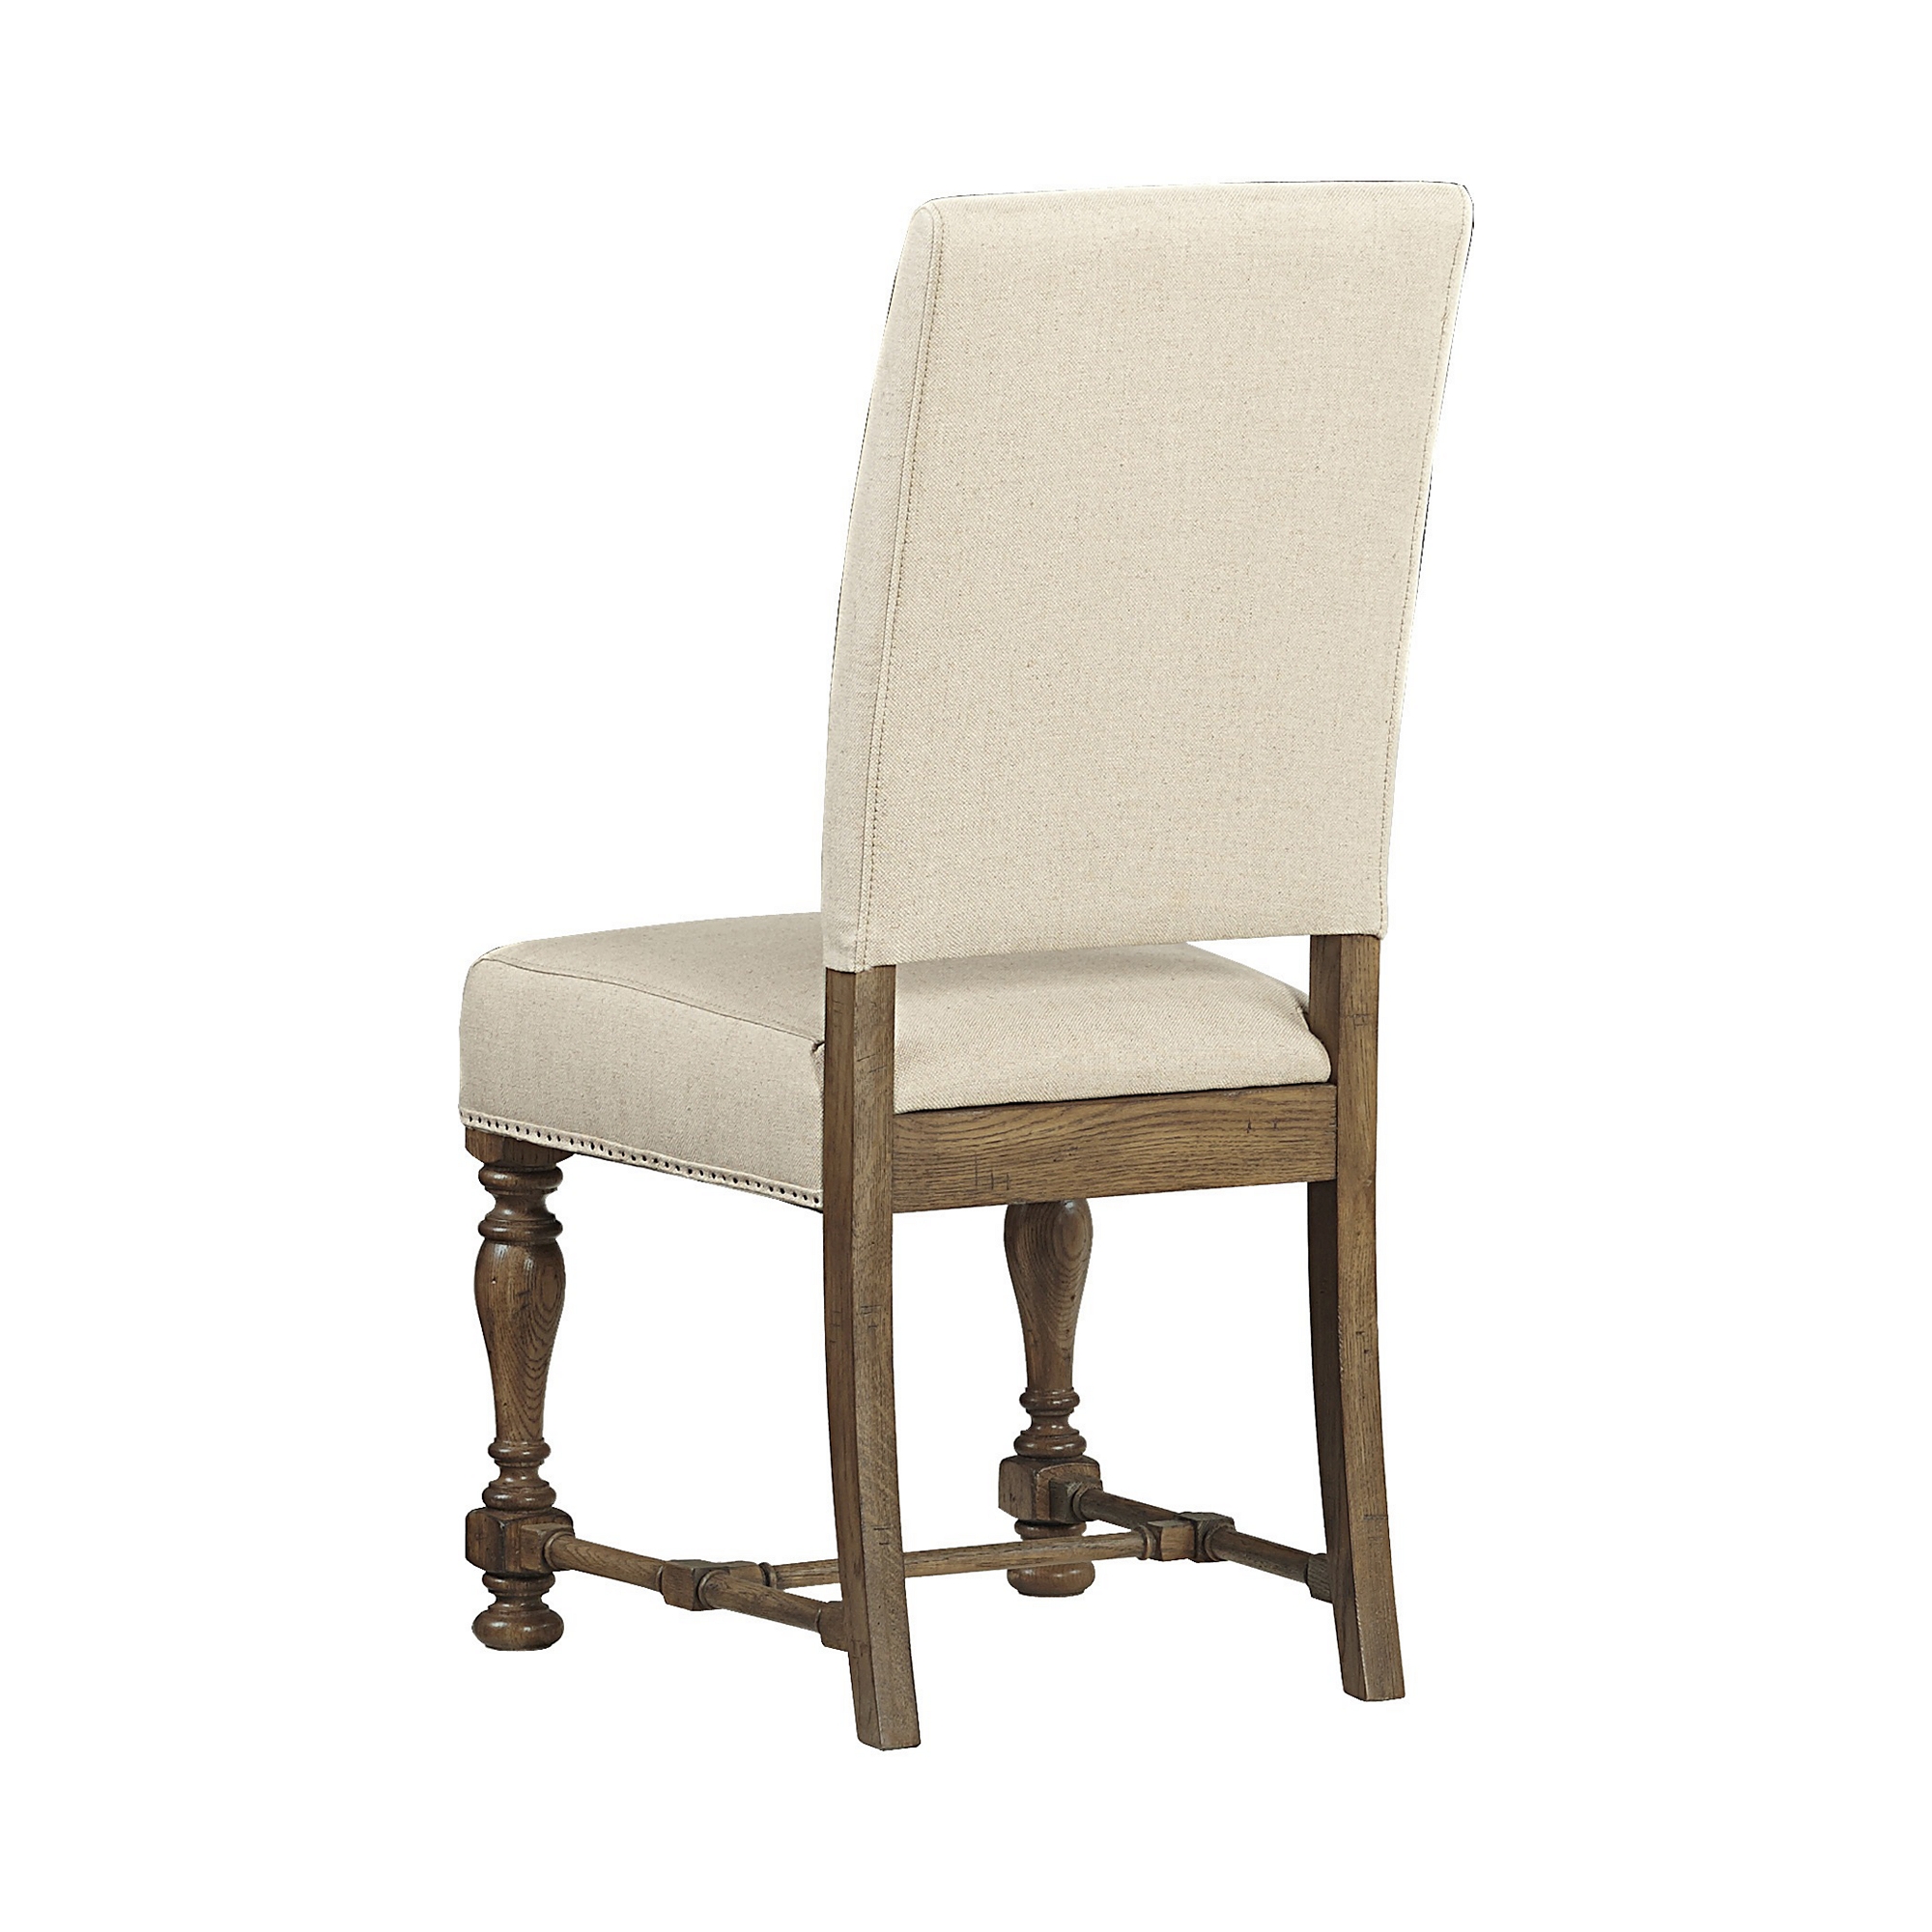 Avondale Ii Dining Chair Find The Perfect Style Havertys